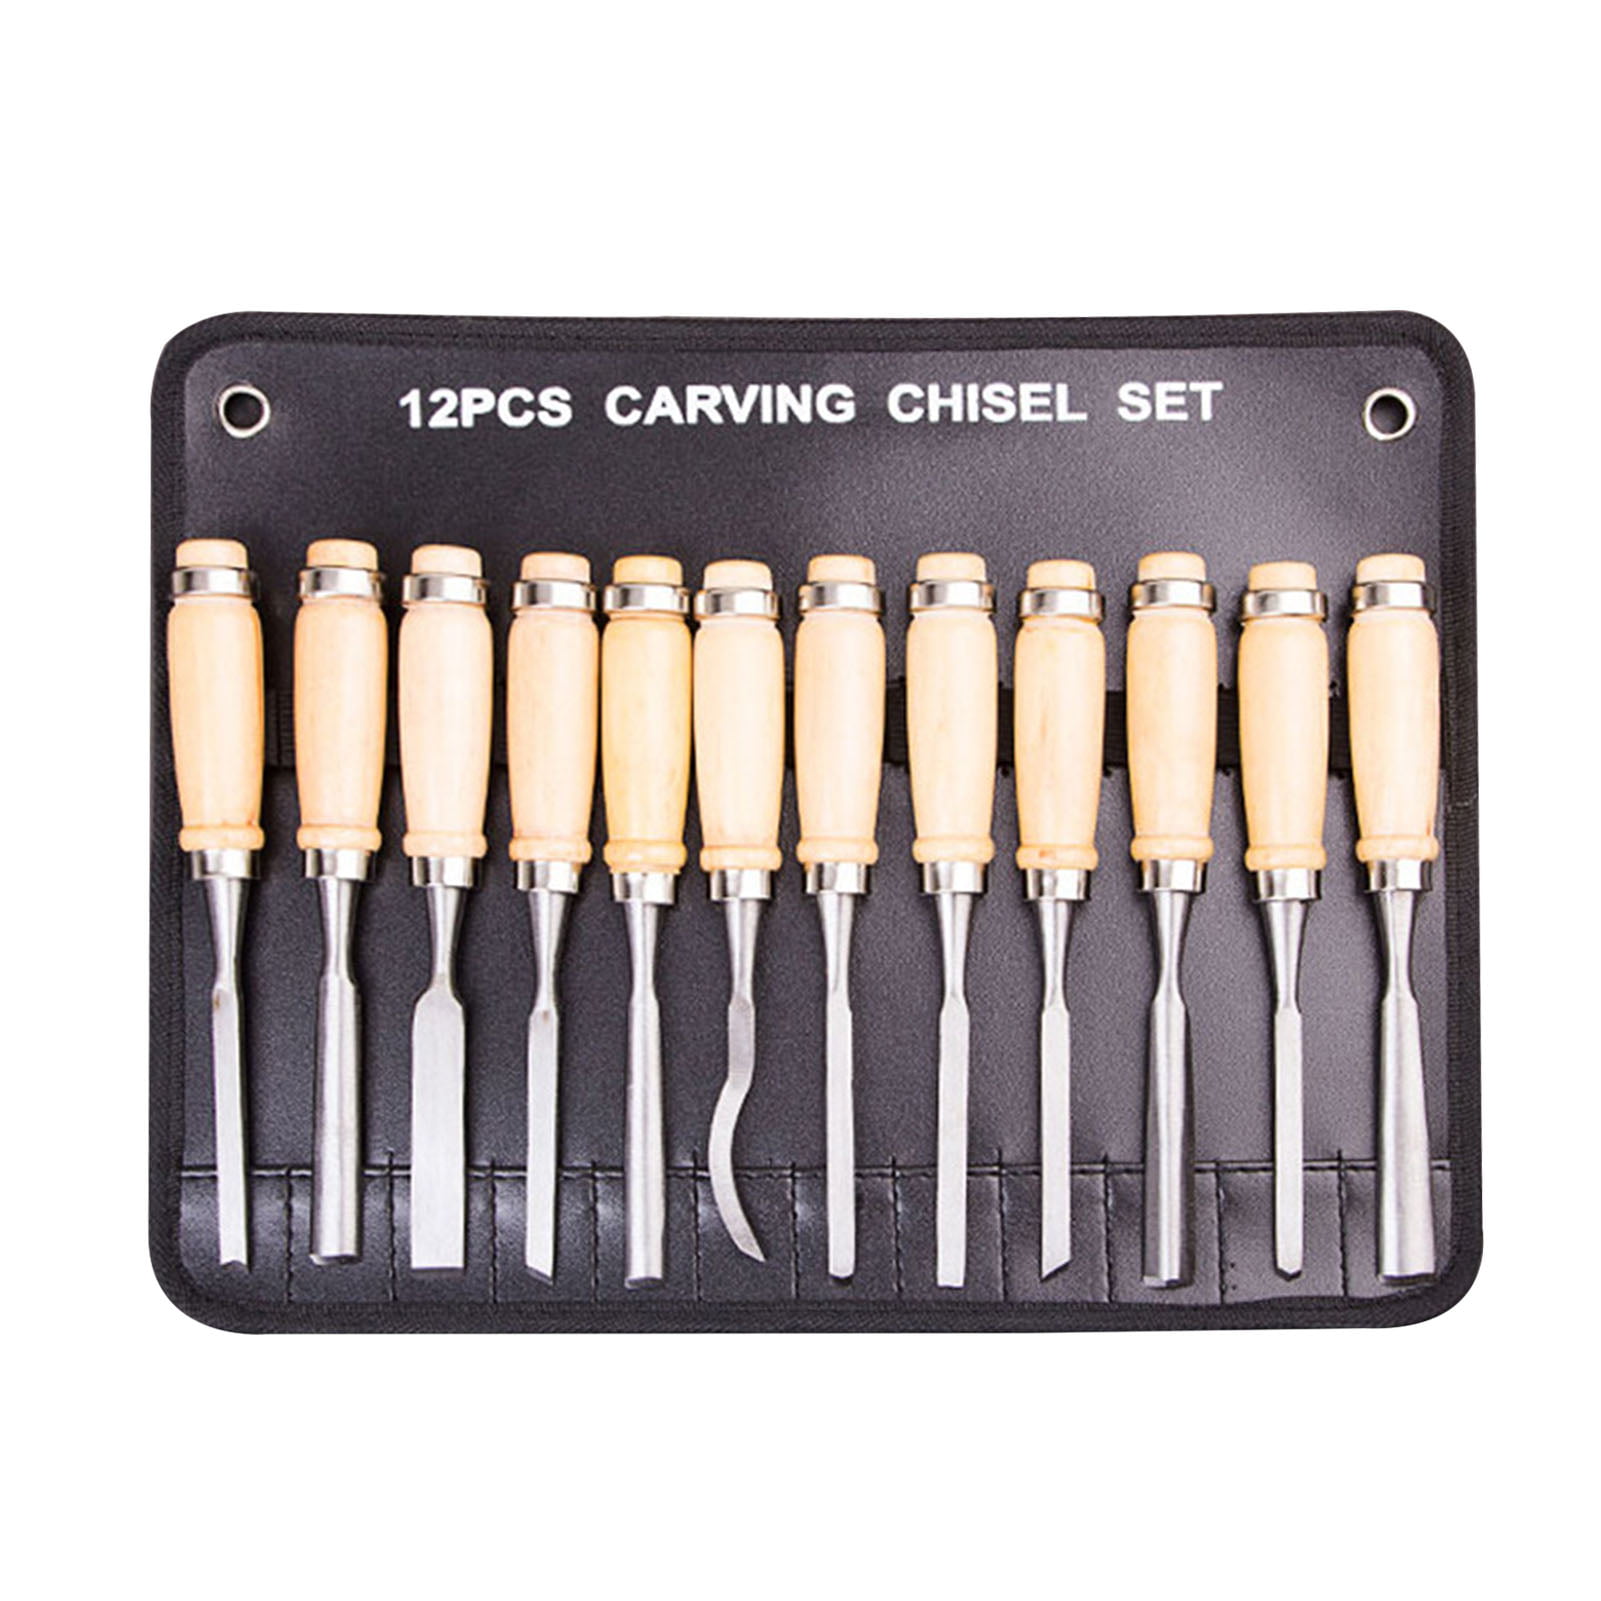 uyoyous 12Pcs Wood Carving Chisels Tool Set in Storage Pouch for Professional Woodworking/Carpentry Gouges Wood Carving Hand Chisels with Wood Handles